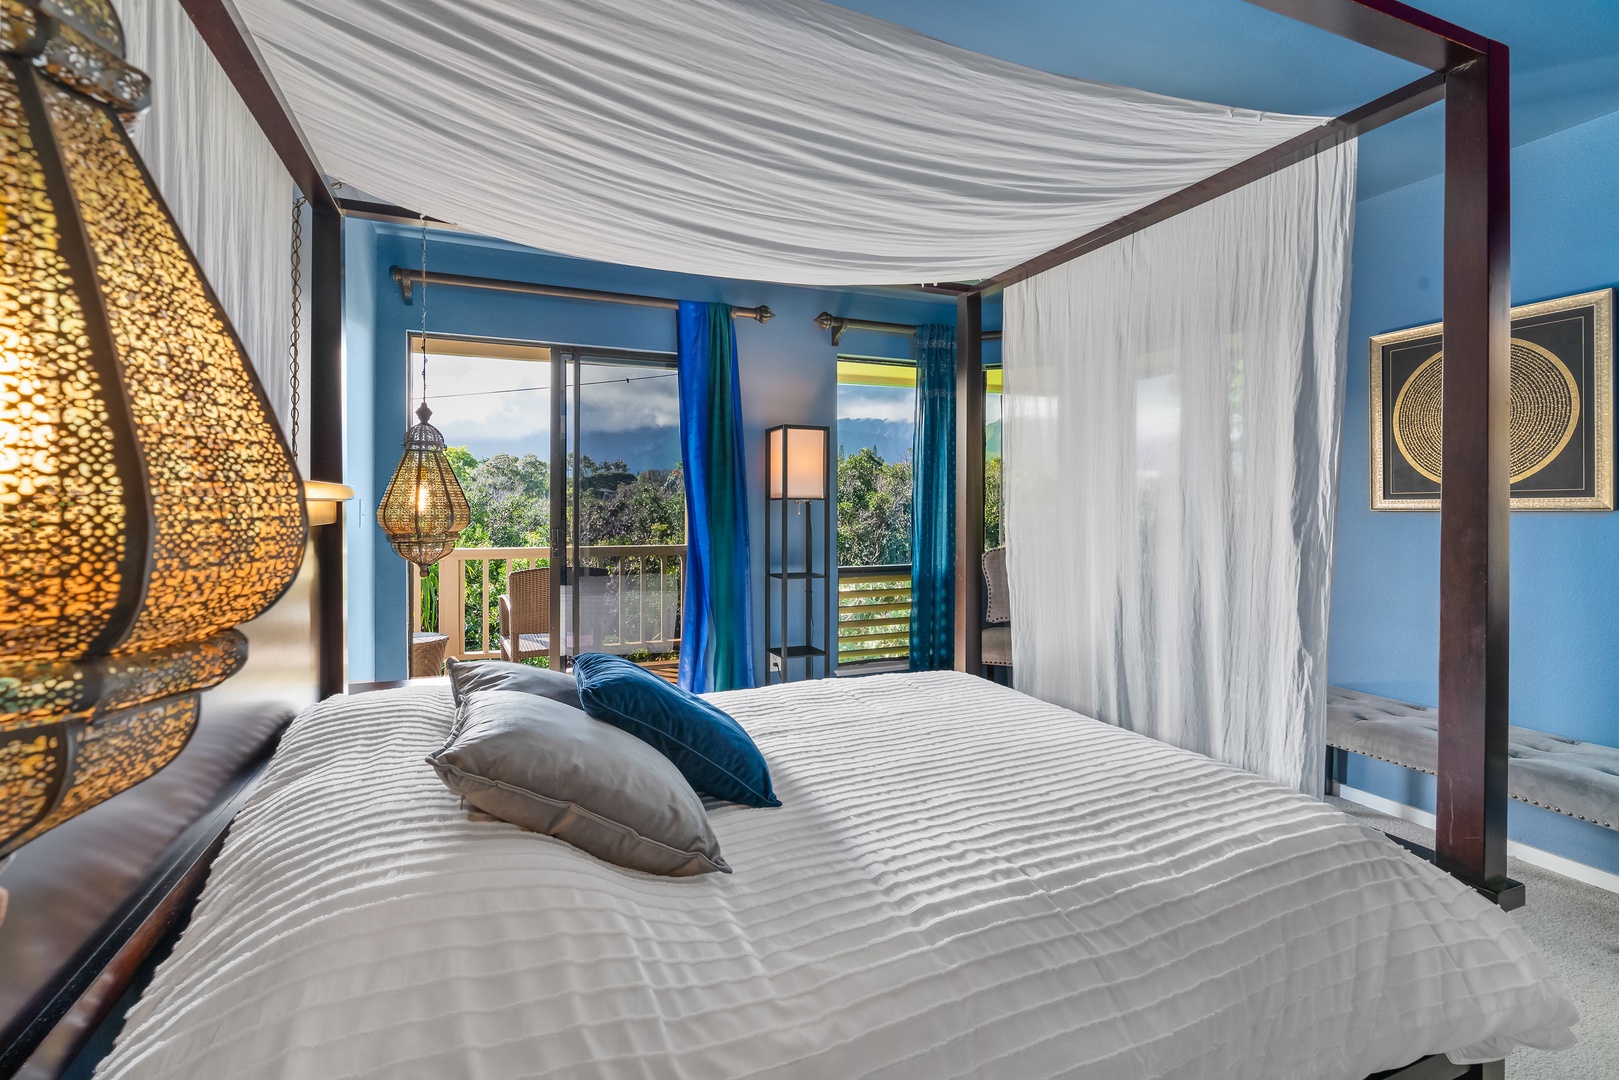 Princeville Vacation Rentals, Makanalani - Primary bedroom with a four poster bed and a private lanai access.